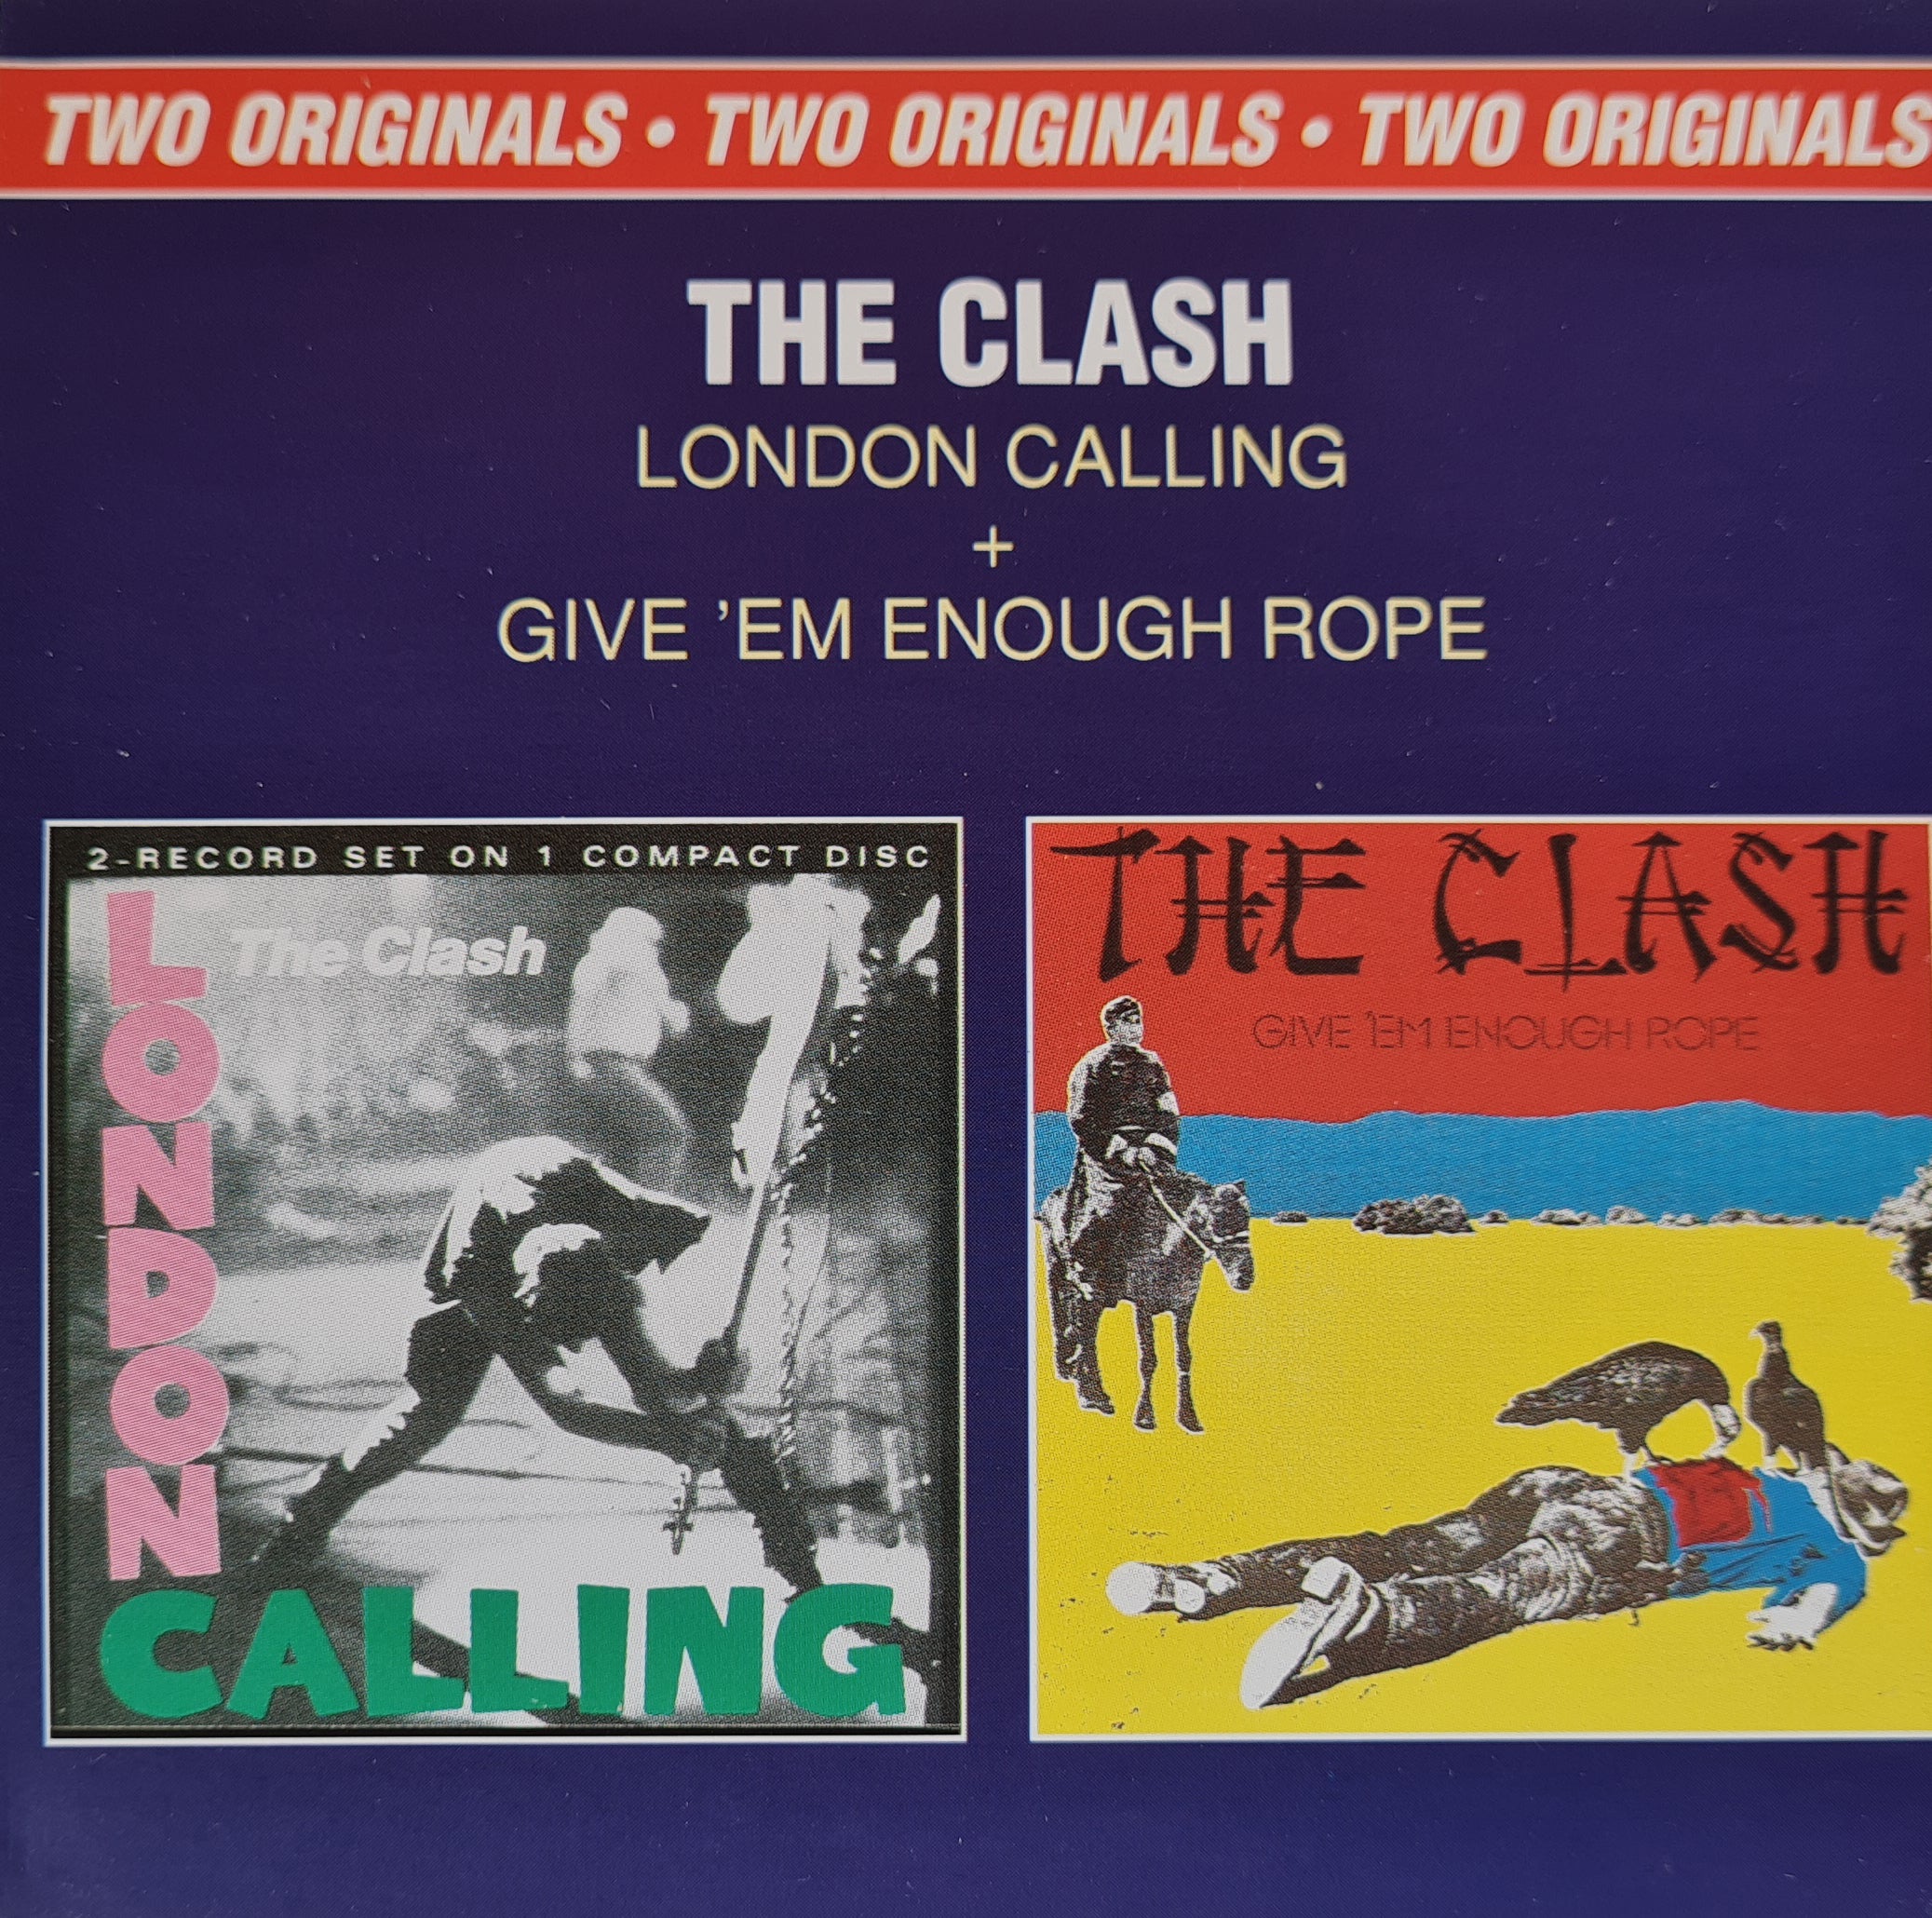 The Clash - London Calling - Give 'Em Enough Rope (CD)